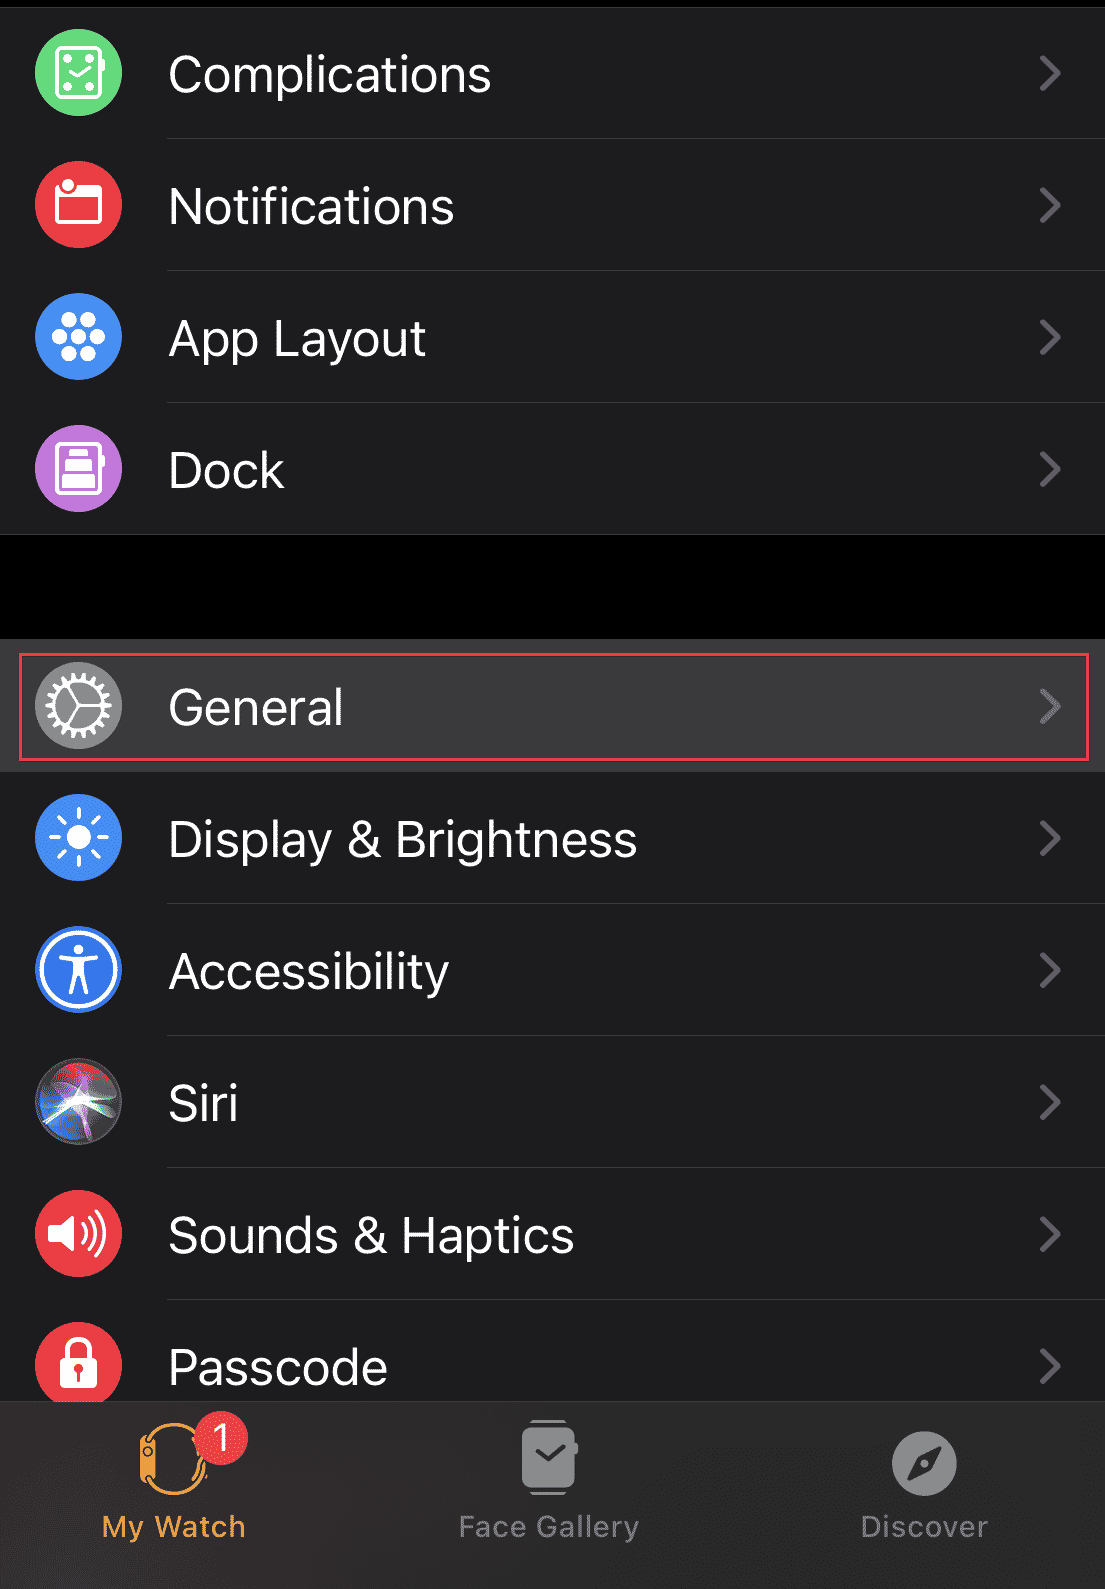 Return to the My Watch menu and tap on General from the list